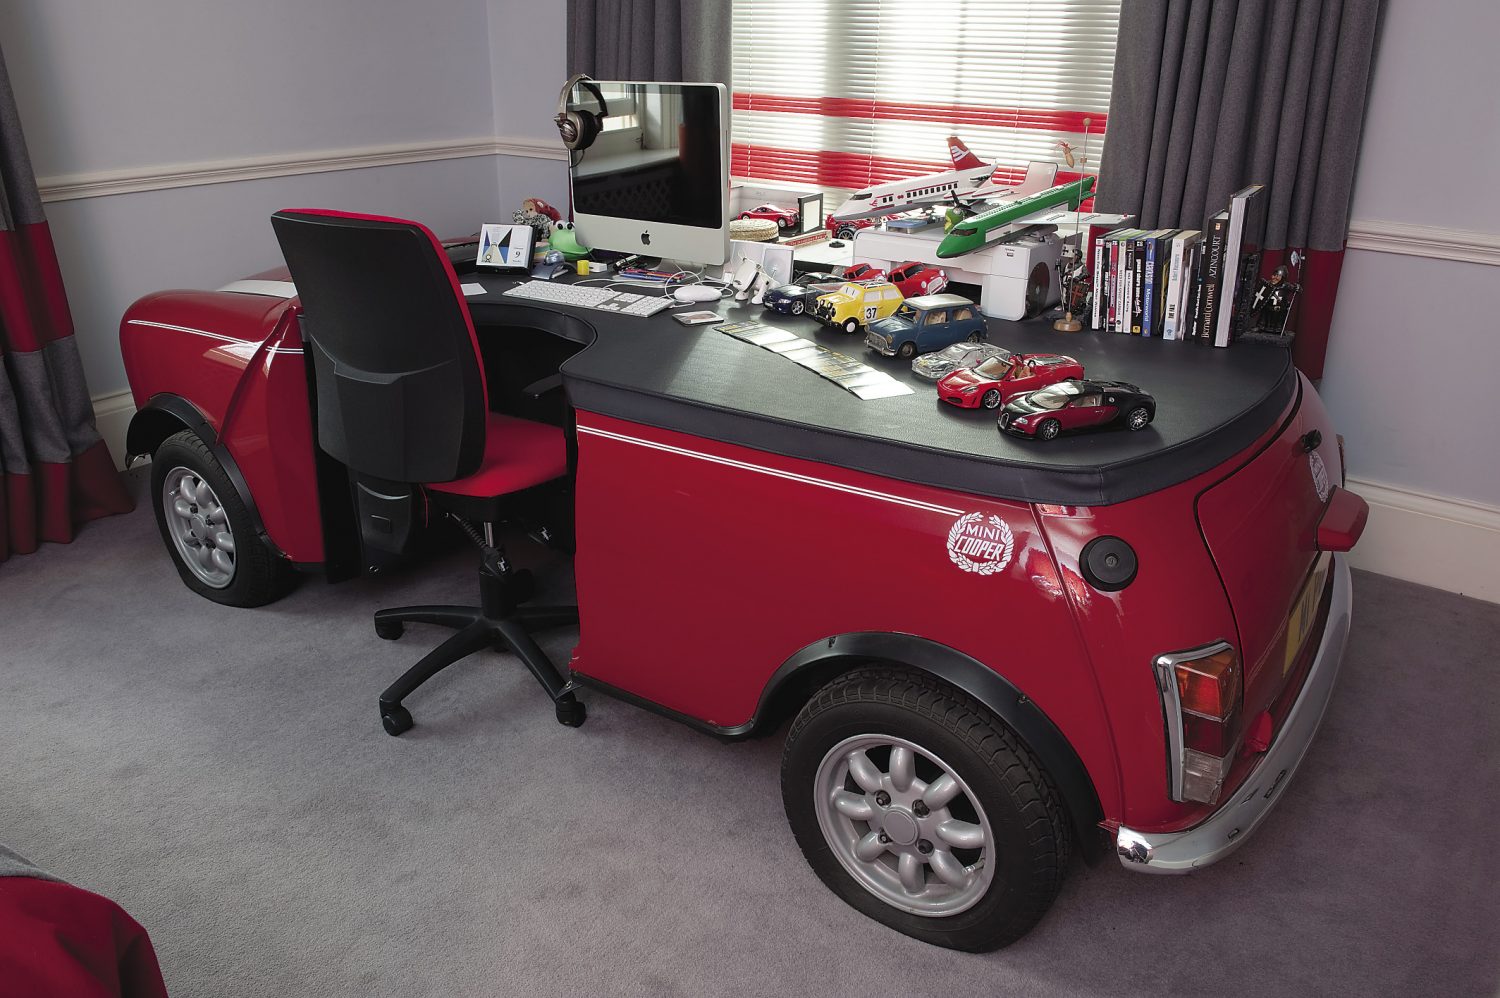 Theodora’s teenage son’s bedroom is a homage to The Italian Job. A full size Mini Cooper has been converted into a desk and the curtains feature the Mini logo as the pelmet motif